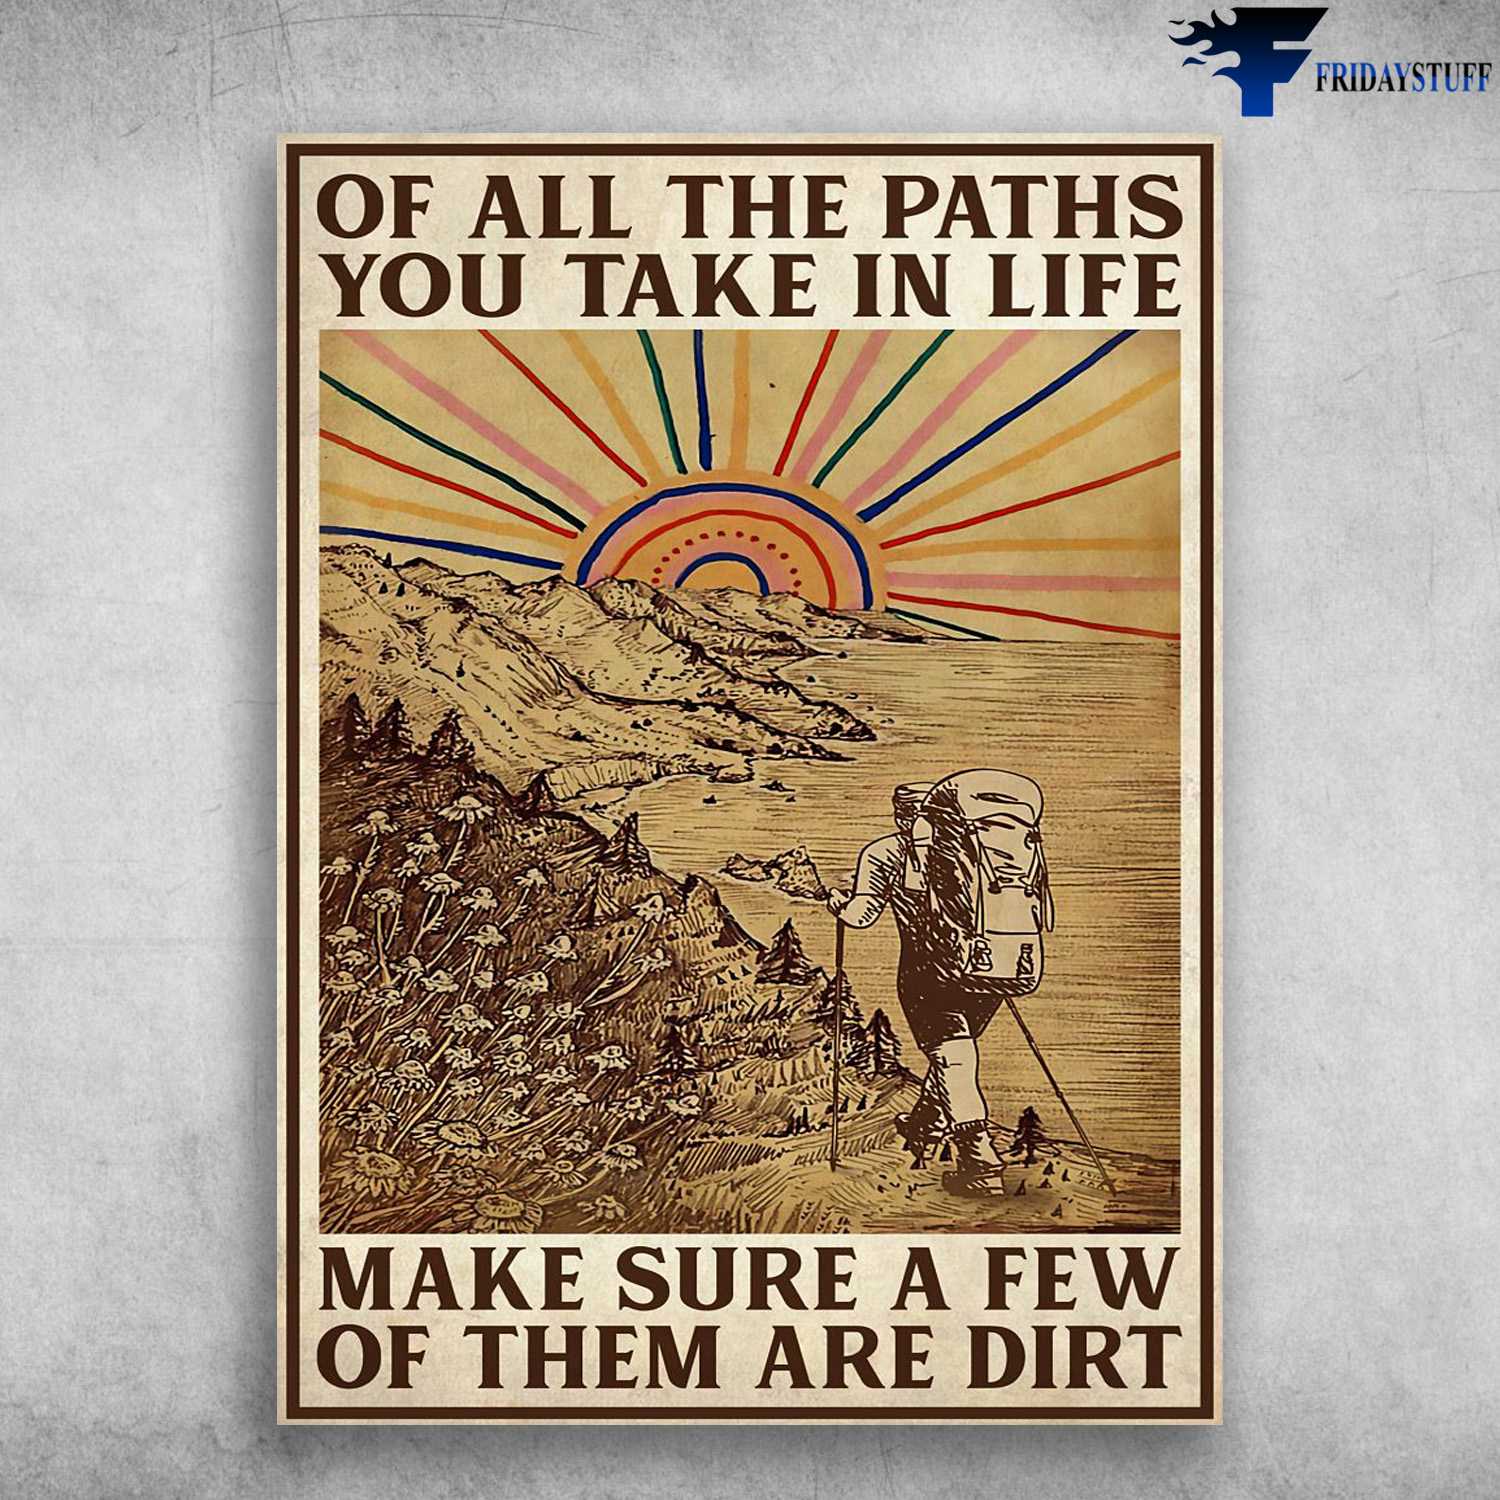 Hiking Man, Hiking Poster - Of All The Paths, You Take In Life, Make Sure A Few Of Them Are Dirt